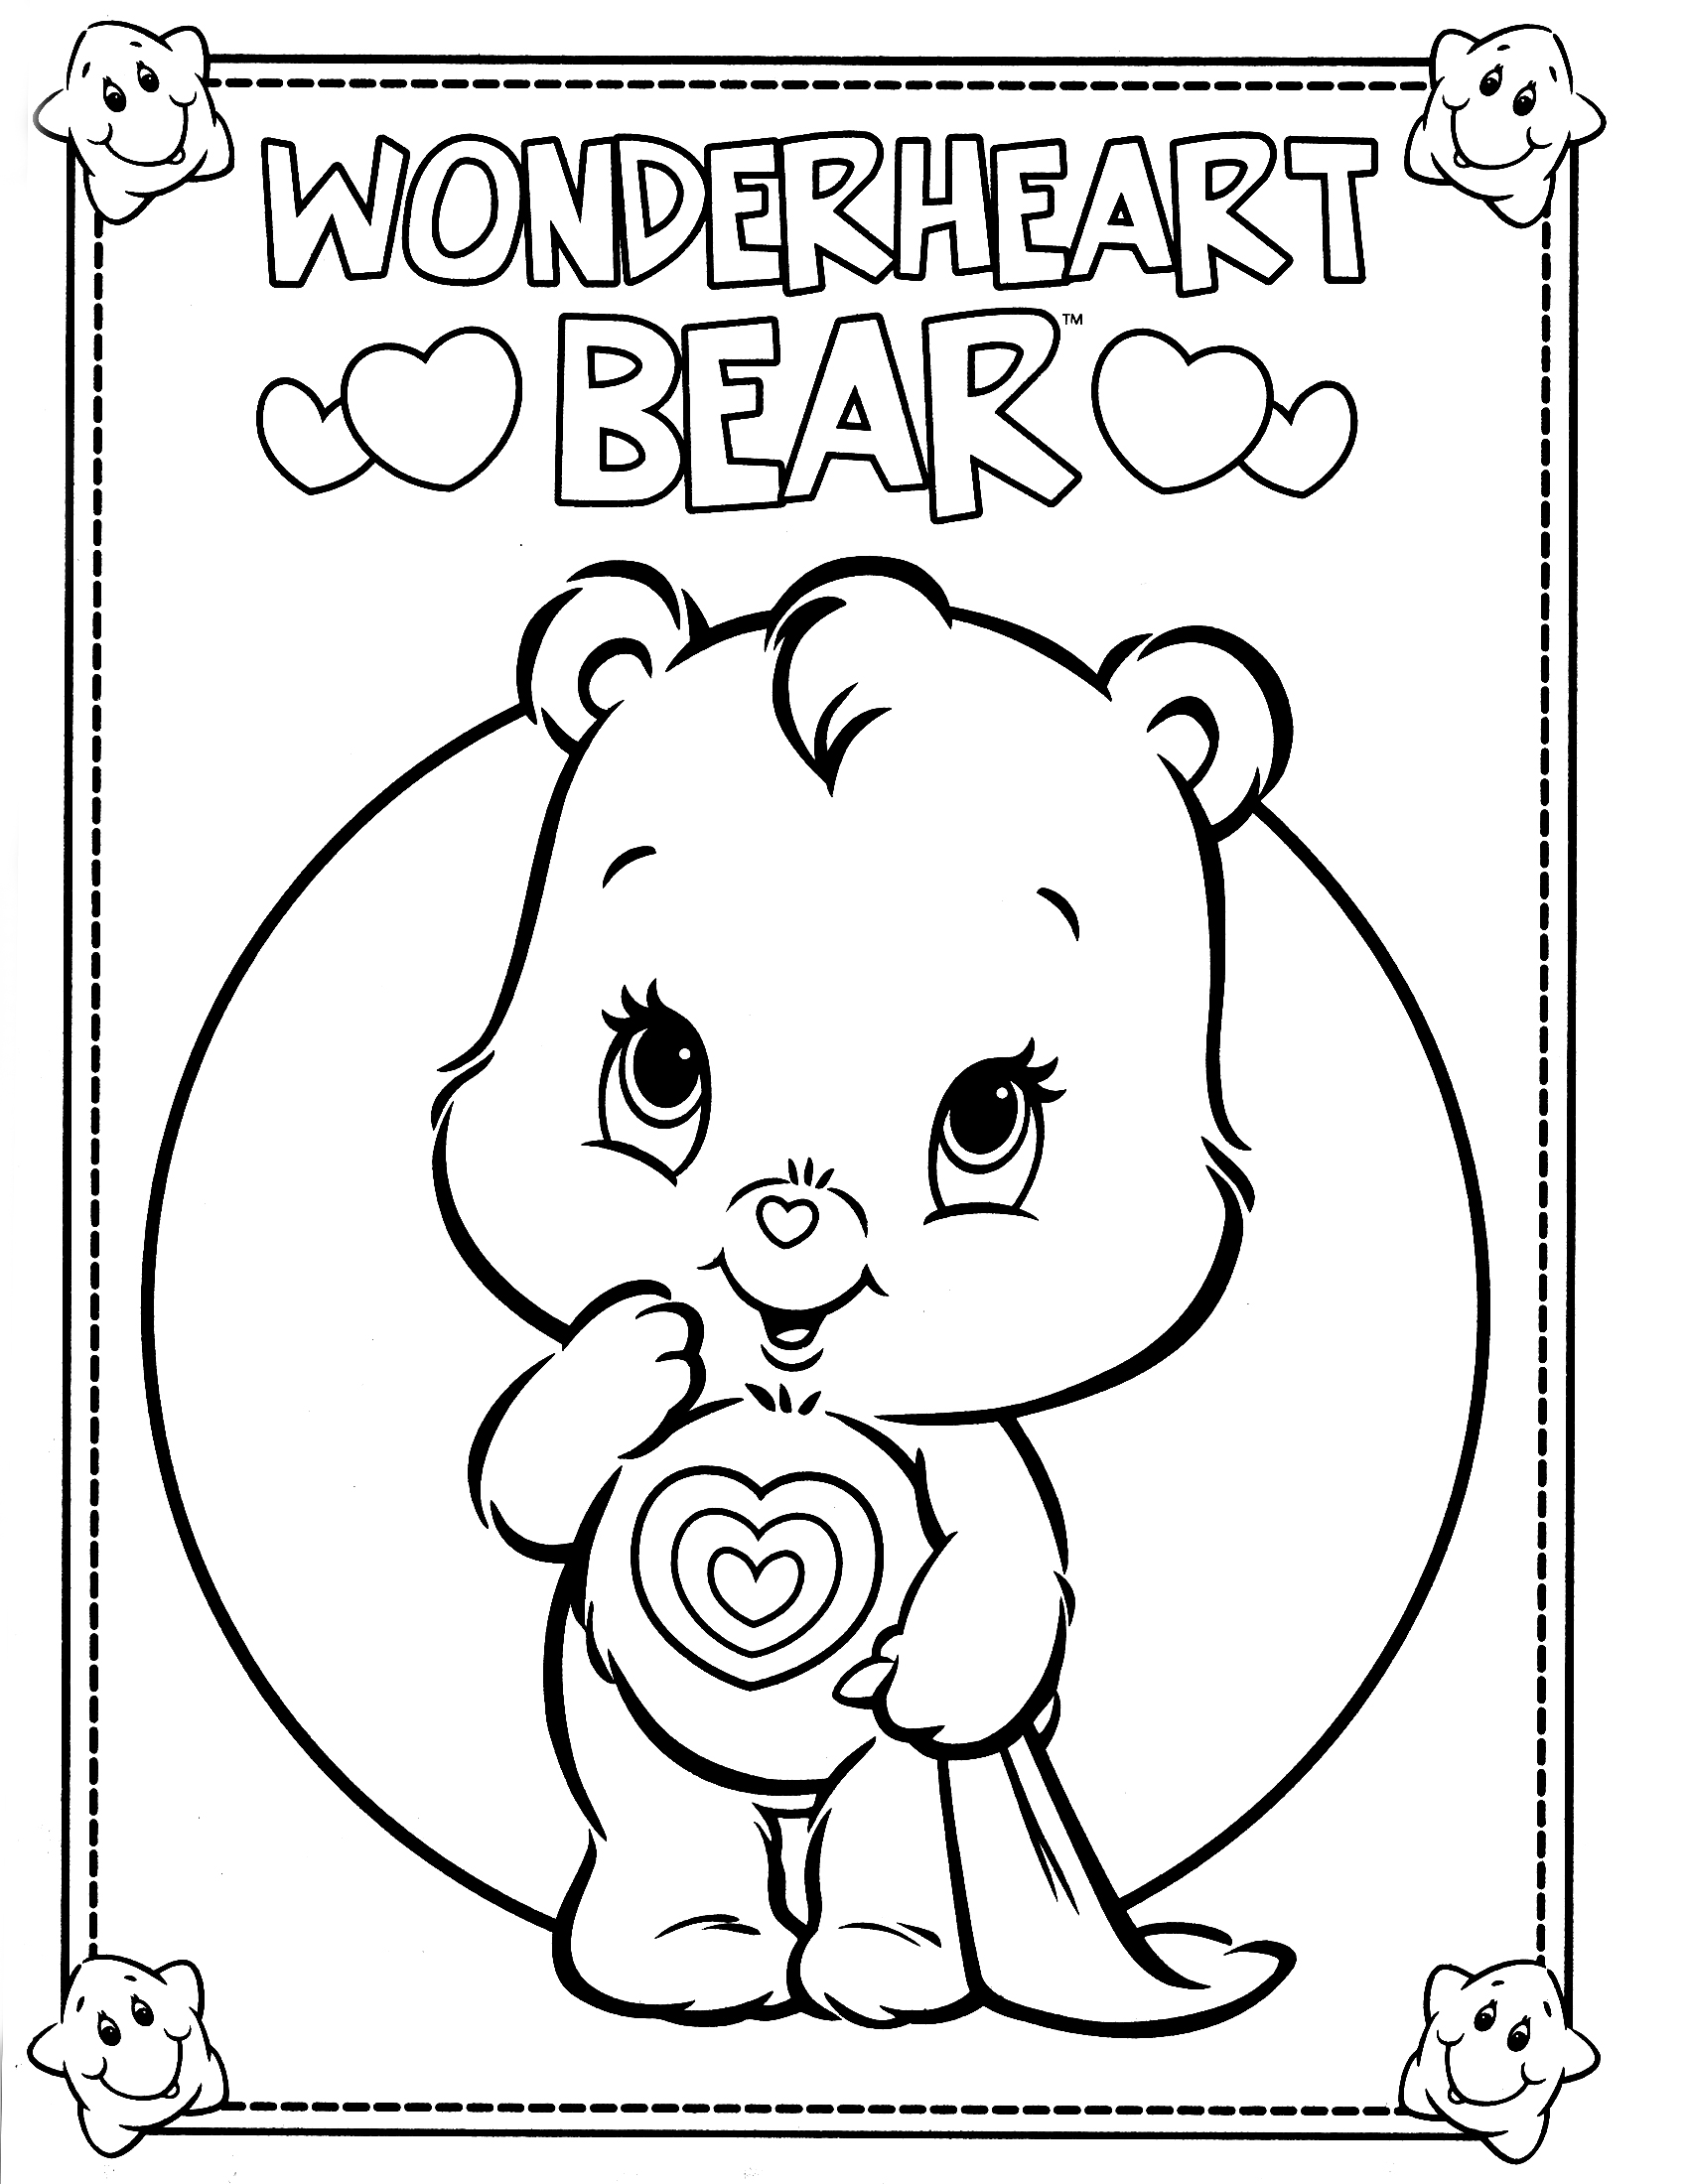 Cheer bear coloring pages download and print for free